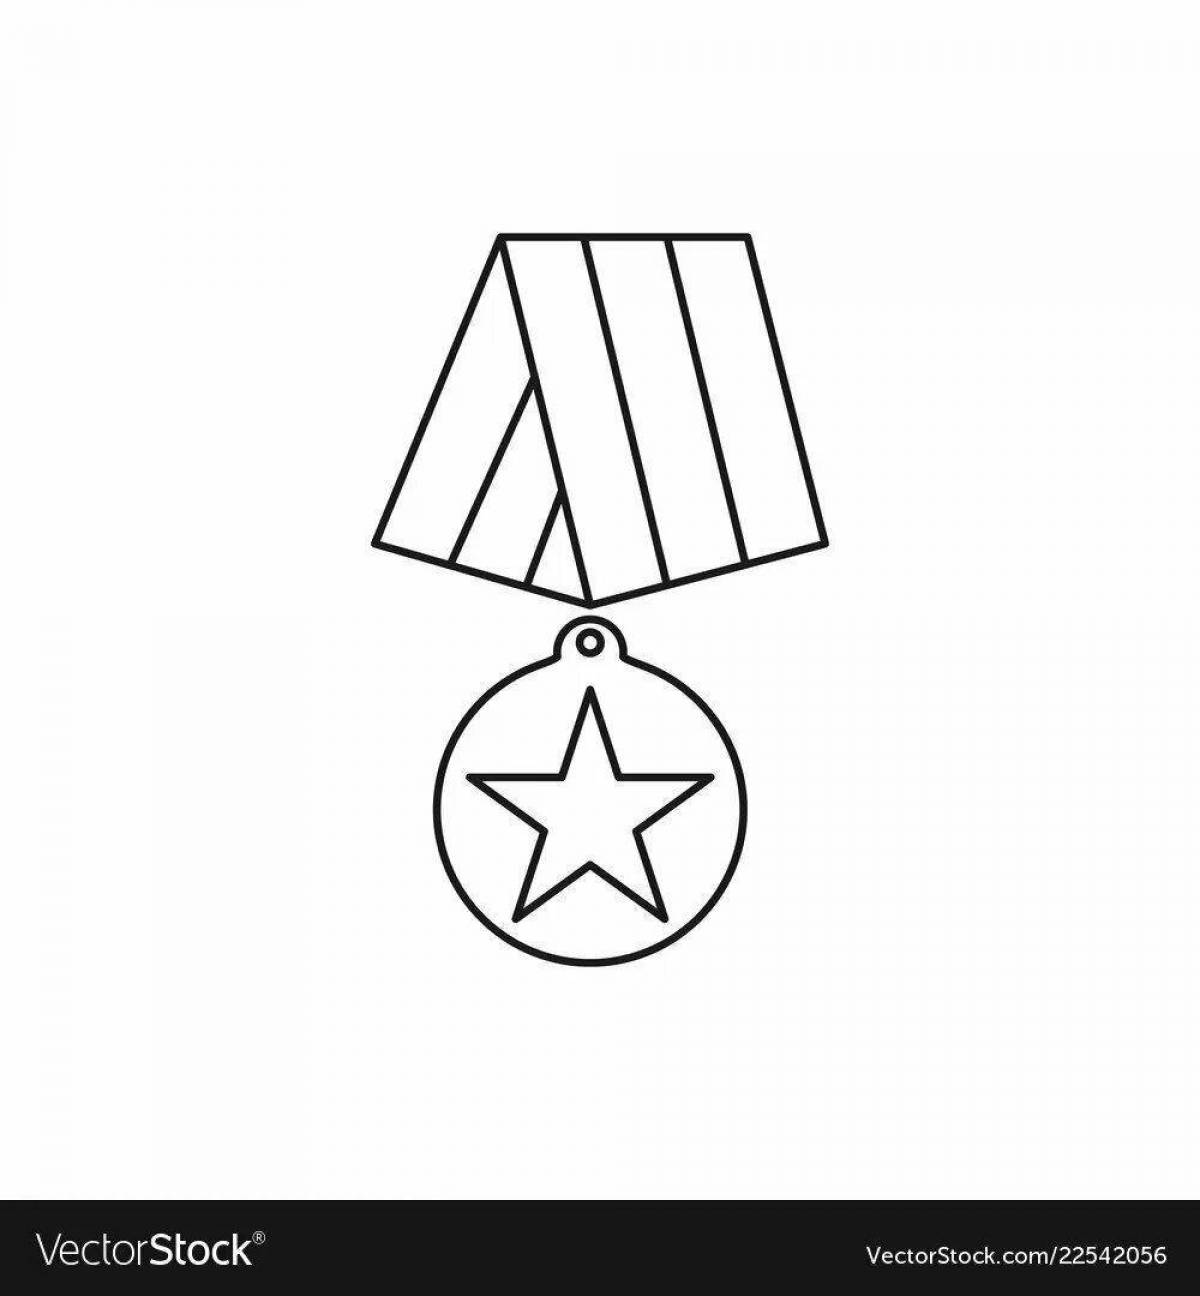 A fascinating medal template for February 23rd